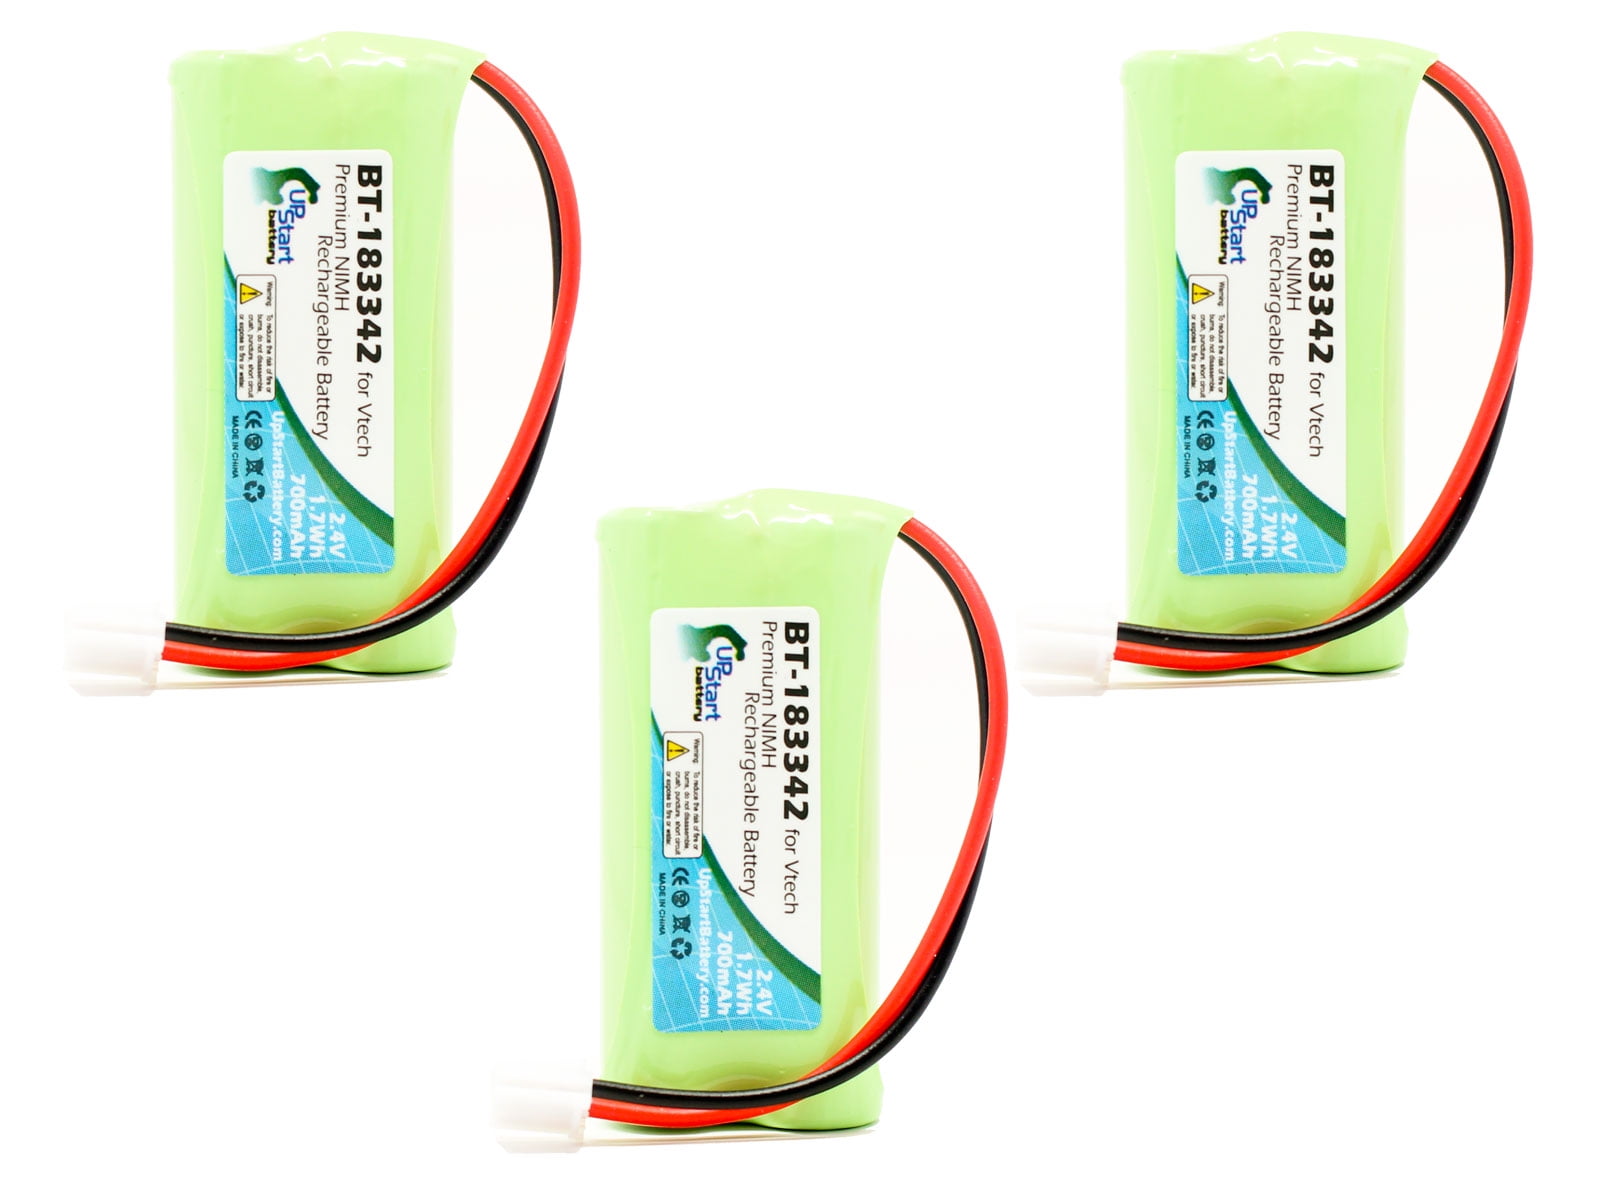 Compatible with VTech Cordless Phone Battery 700mAh 2.4V NI-MH Replacement for VTech 6041 Battery 